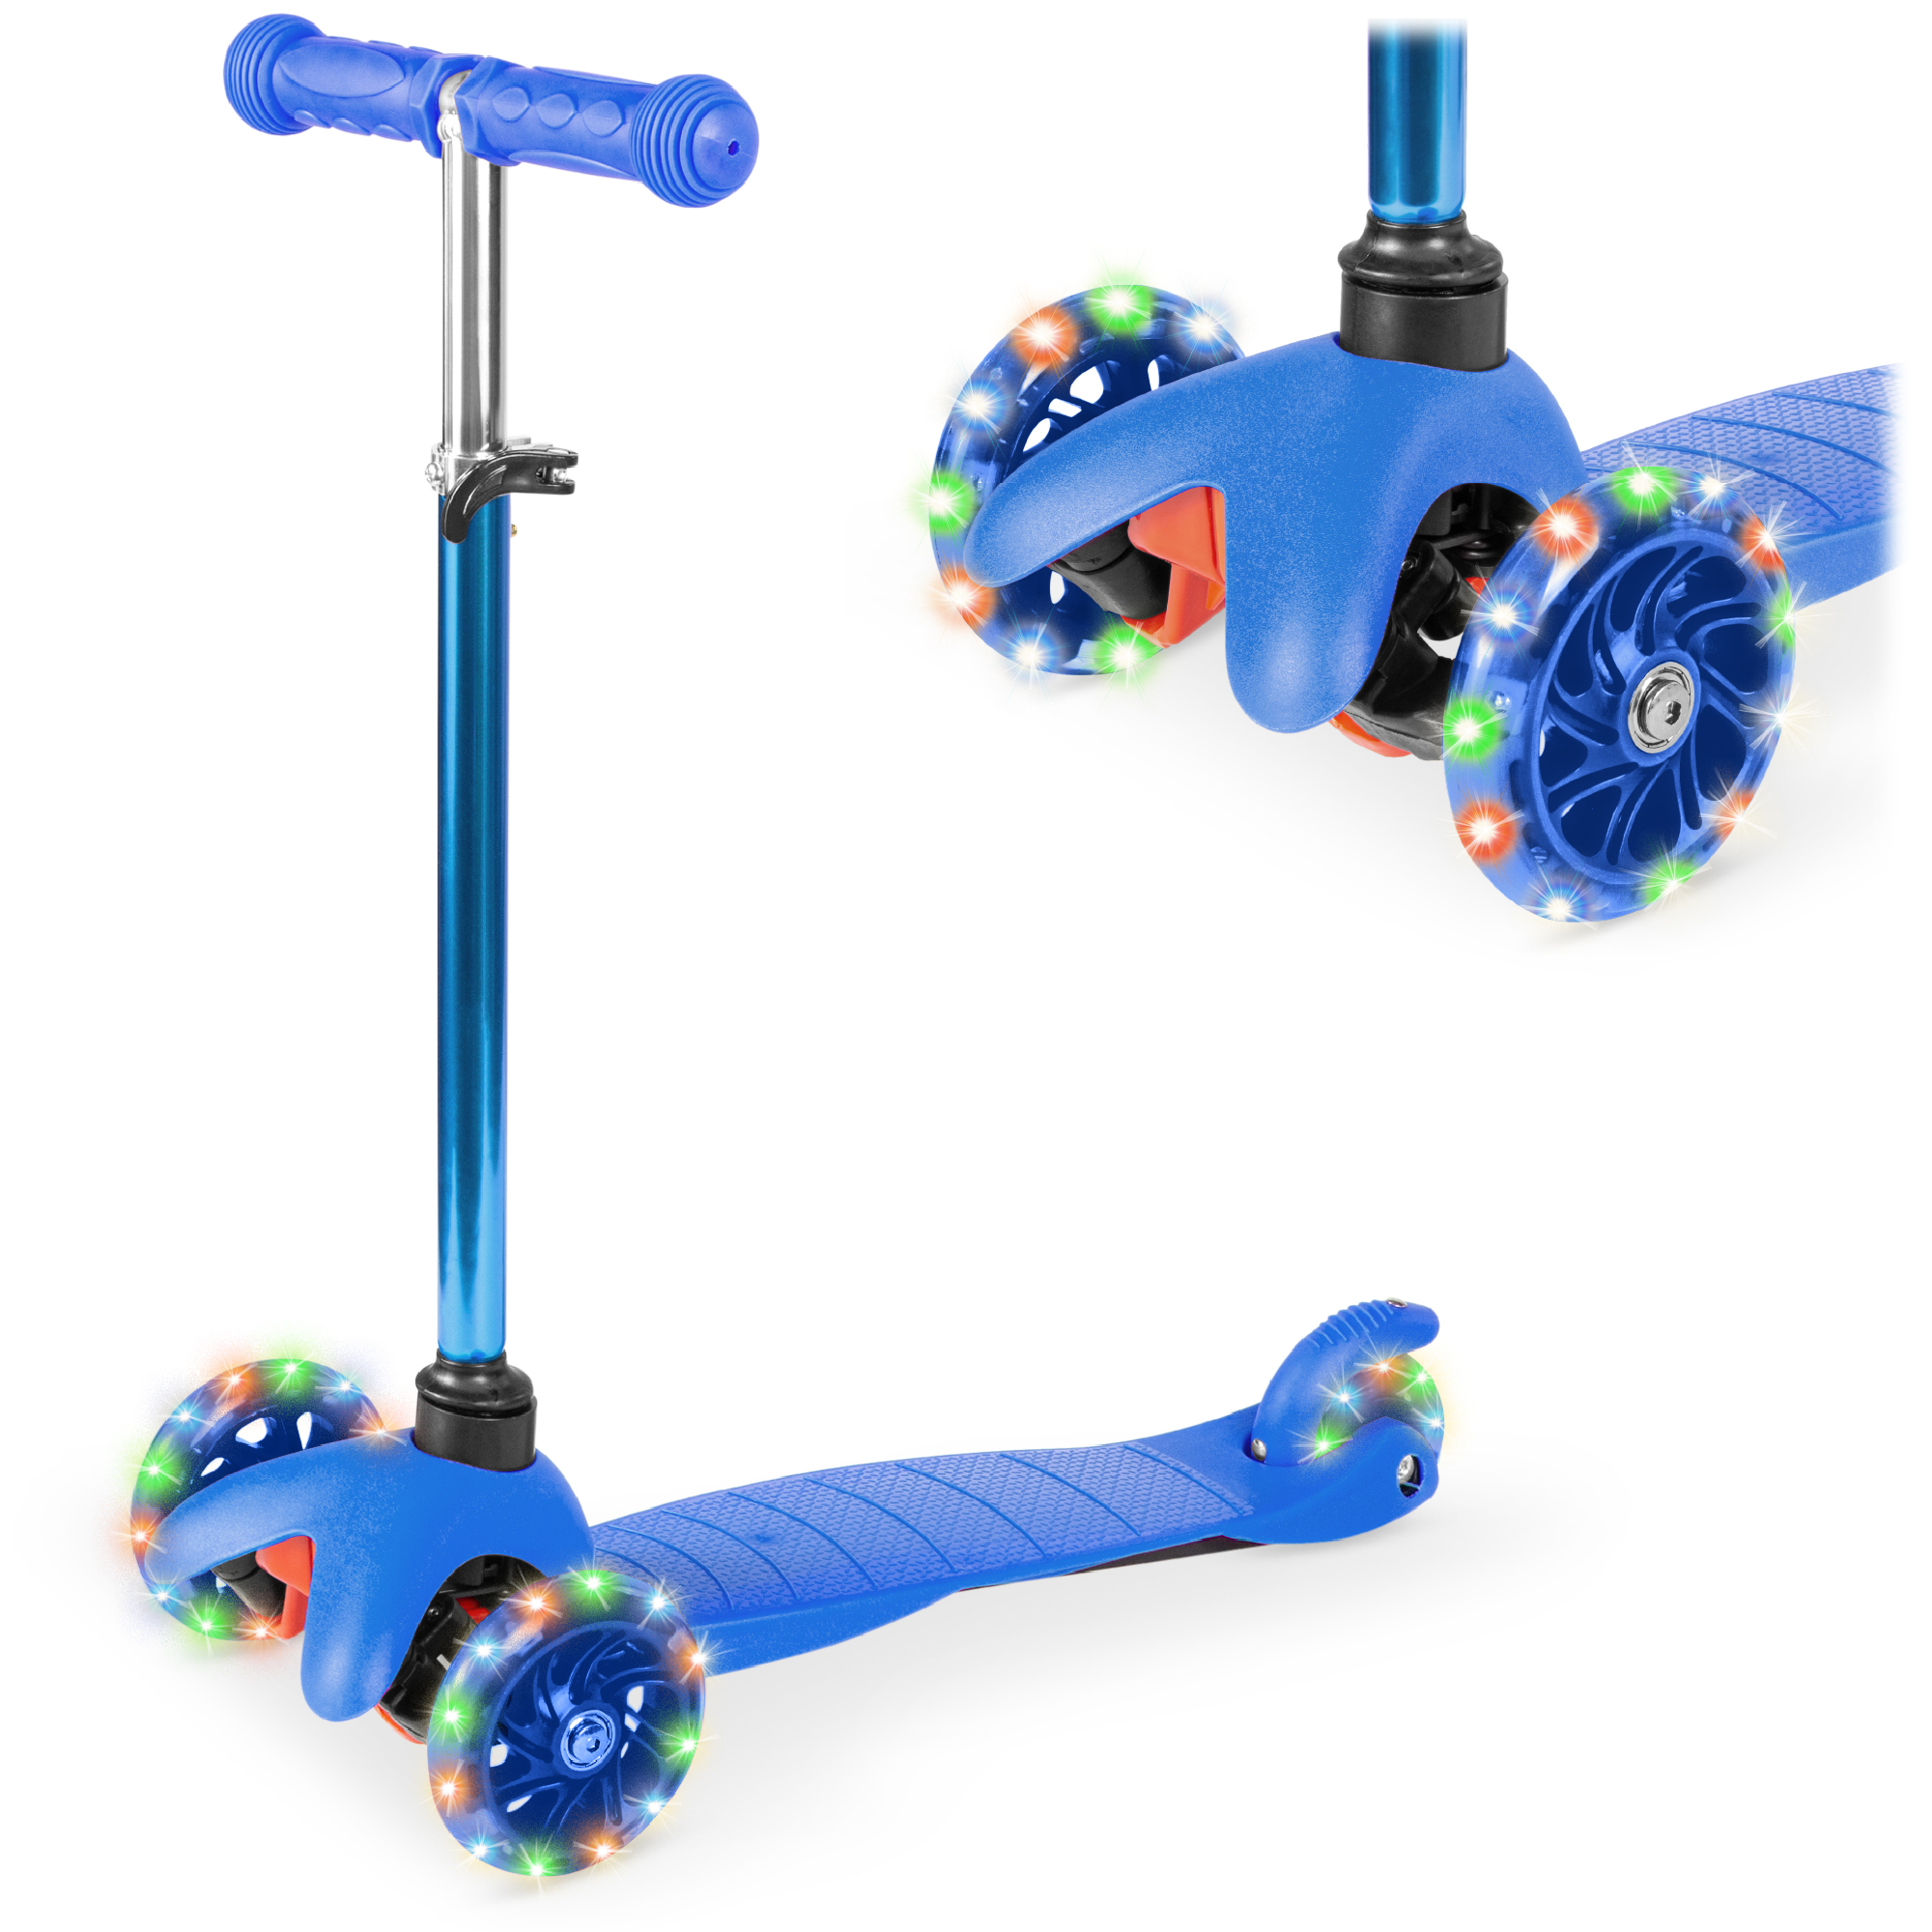 Best Choice Products Kids Mini Kick Scooter Toy w/ Light-Up Wheels and Height Adjustable T-Bar -Blue - image 1 of 7